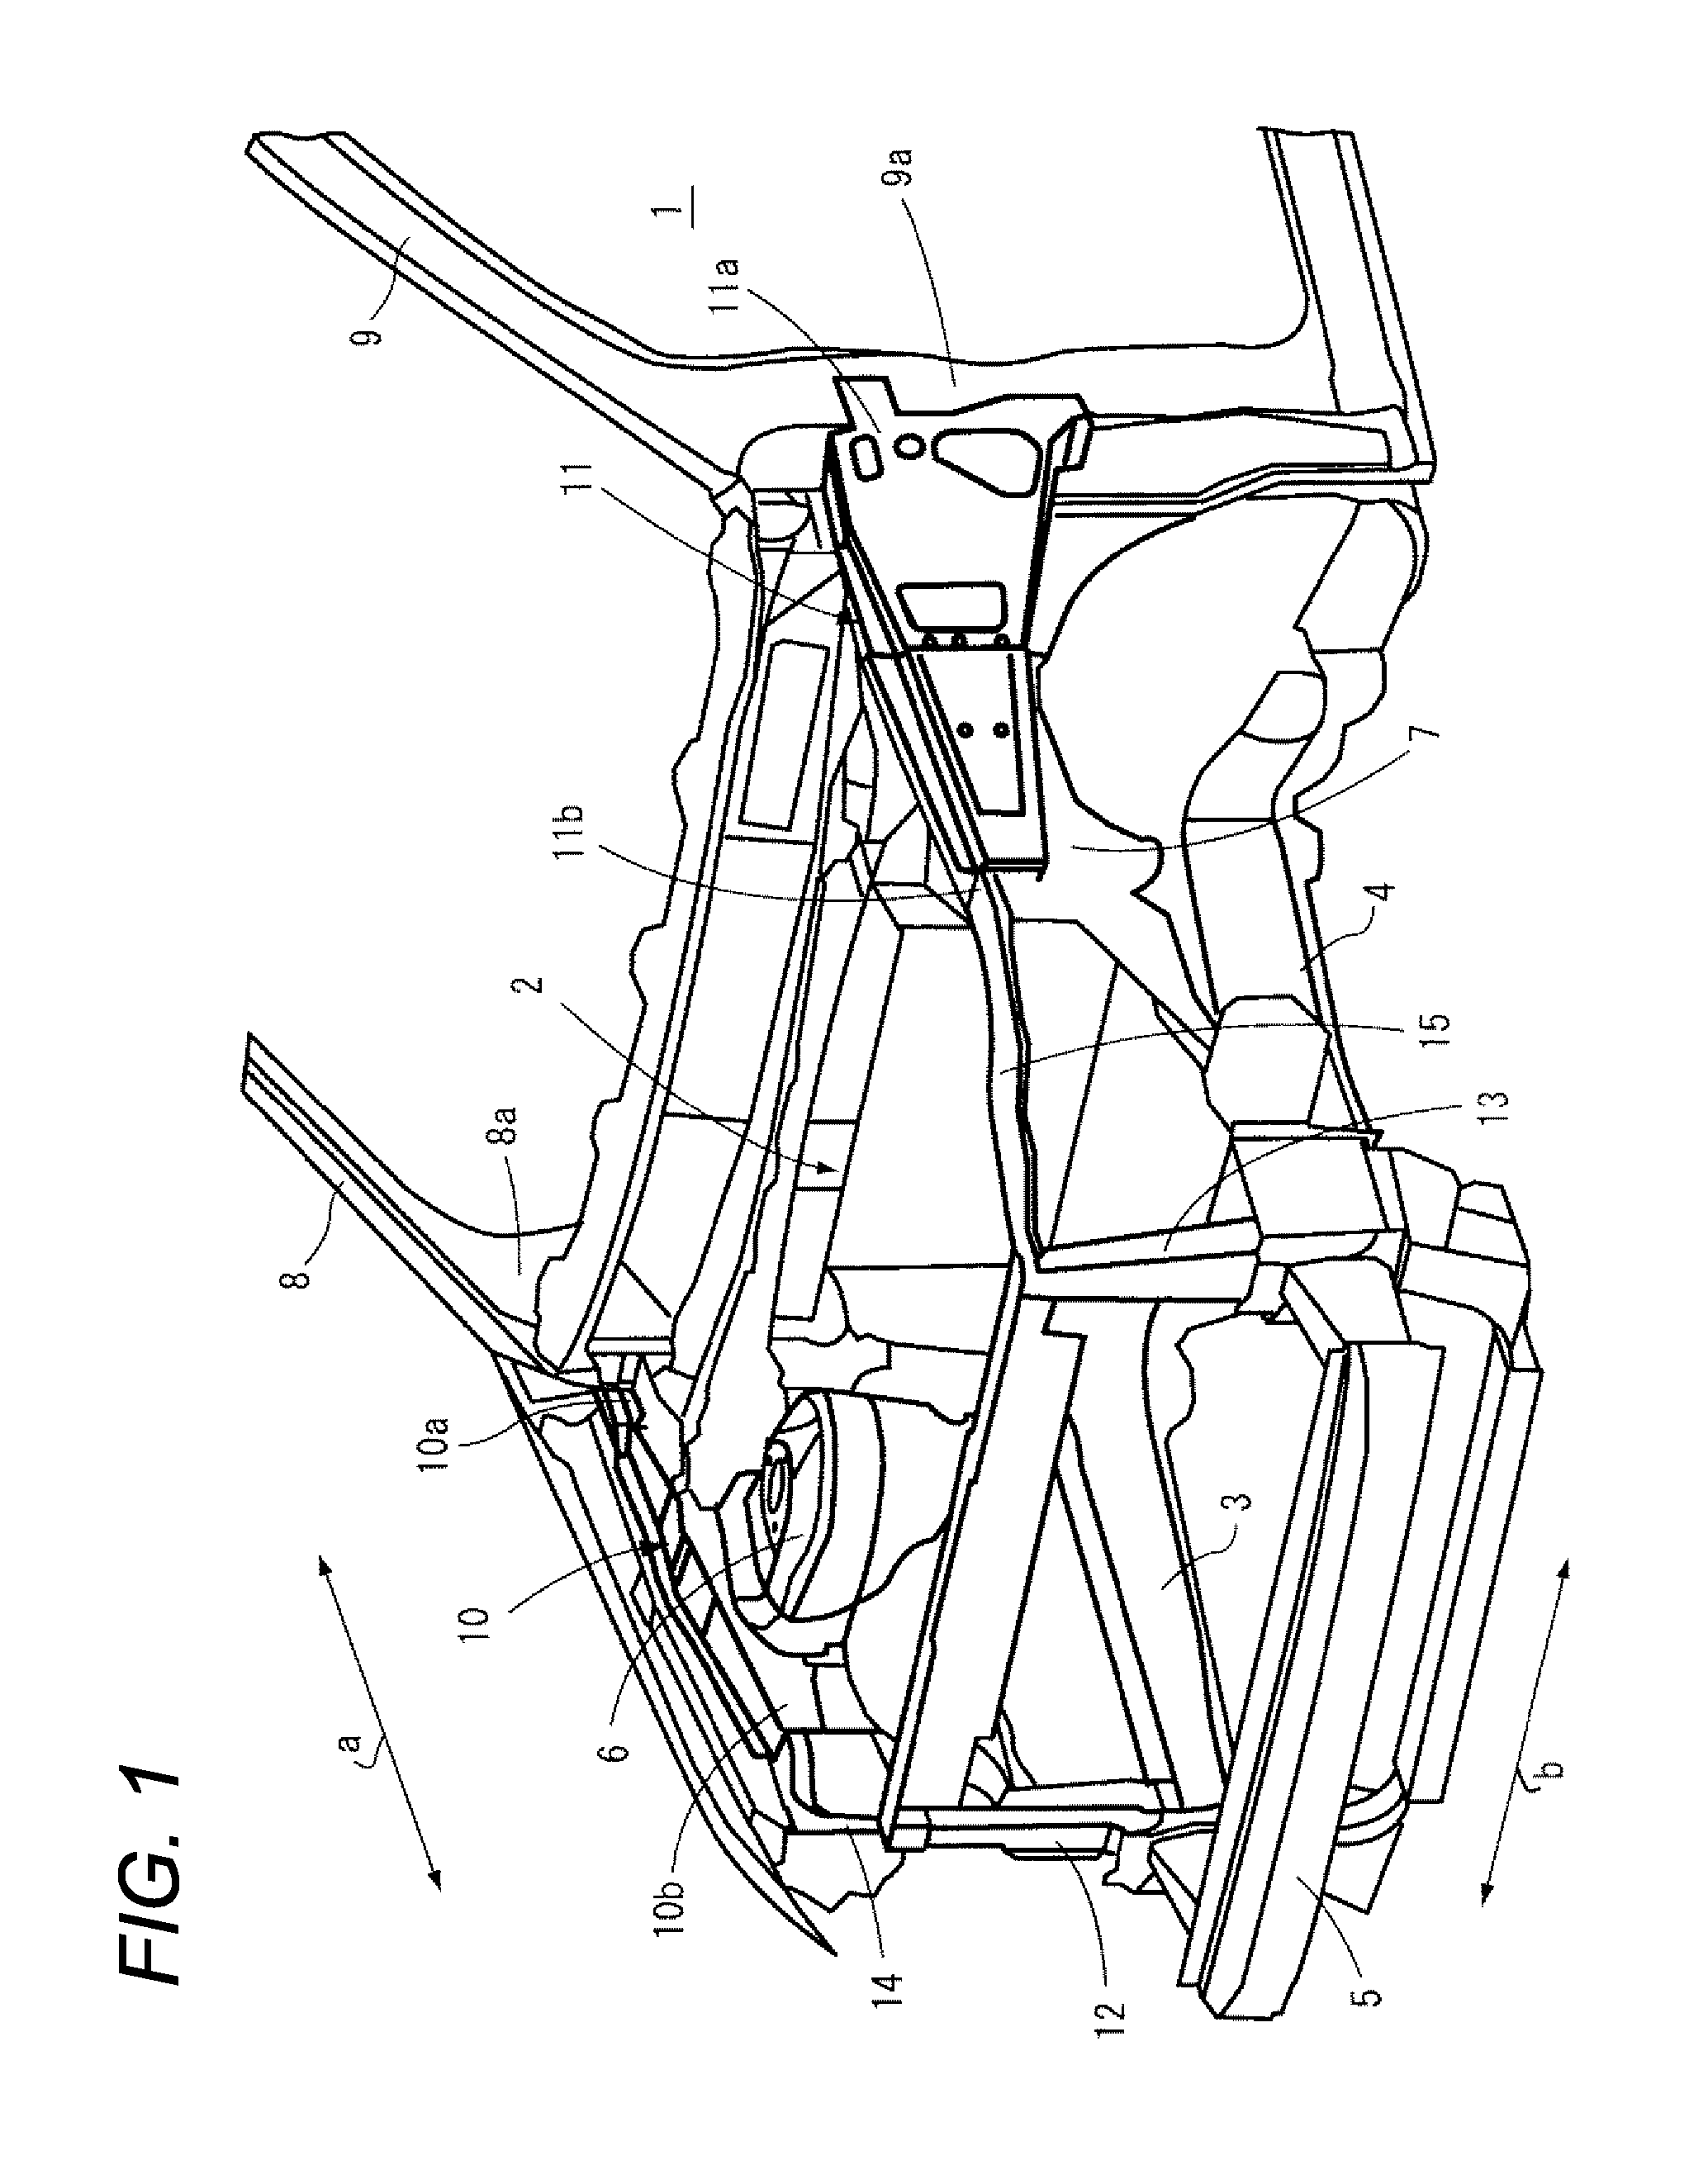 Front part body structure of vehicle